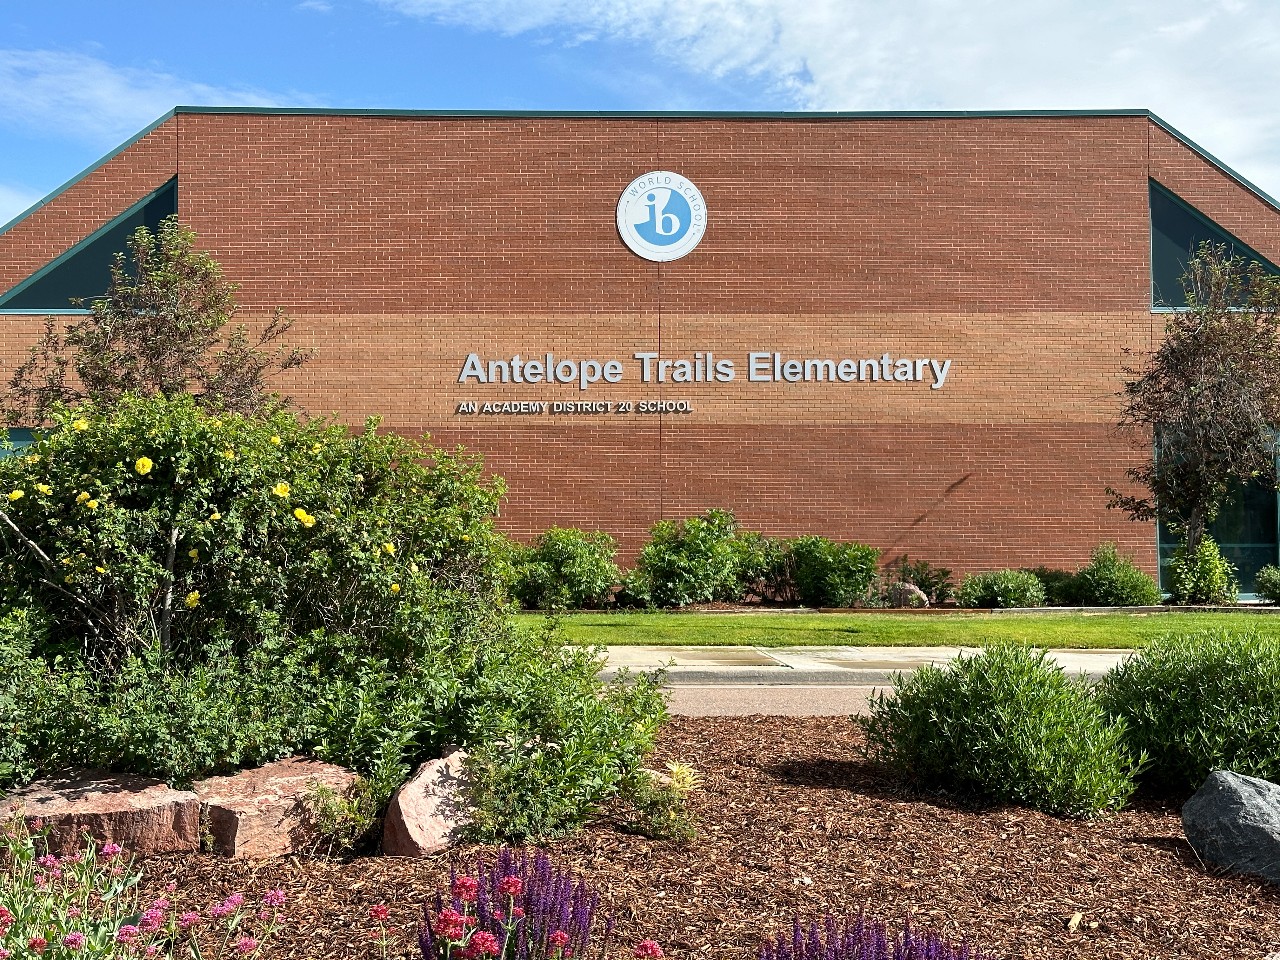 The Antelope Trails school building.